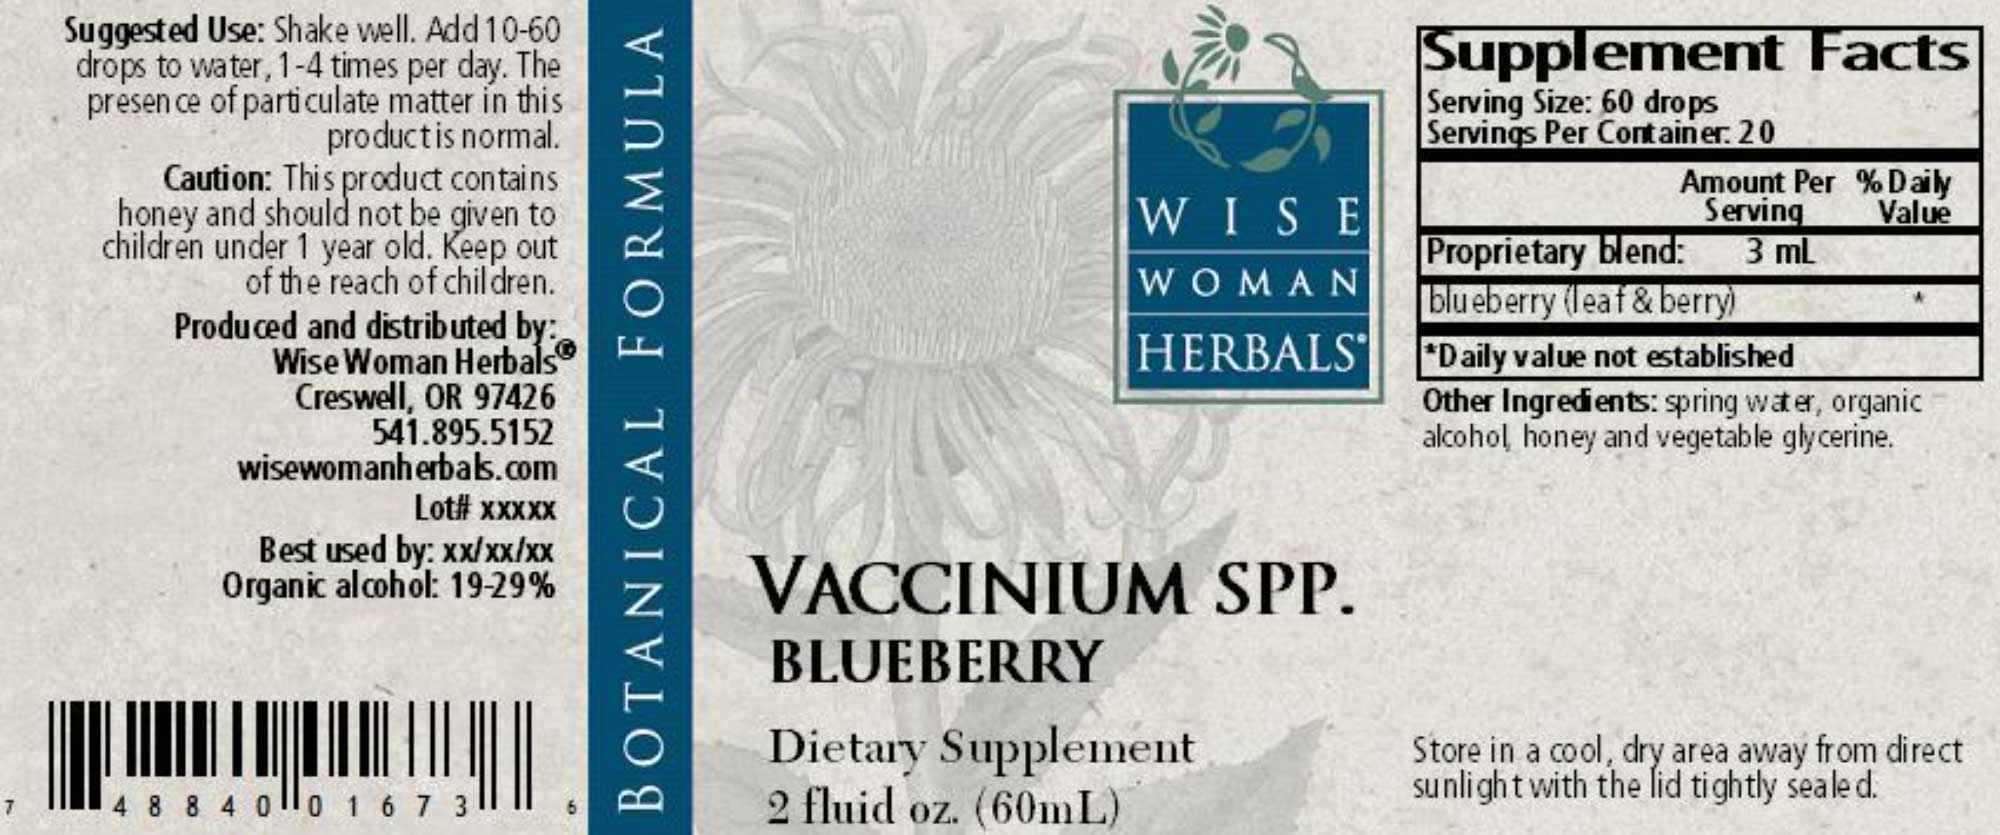 Wise Woman Herbals Vaccinium Spp Blueberry Bilberry Label